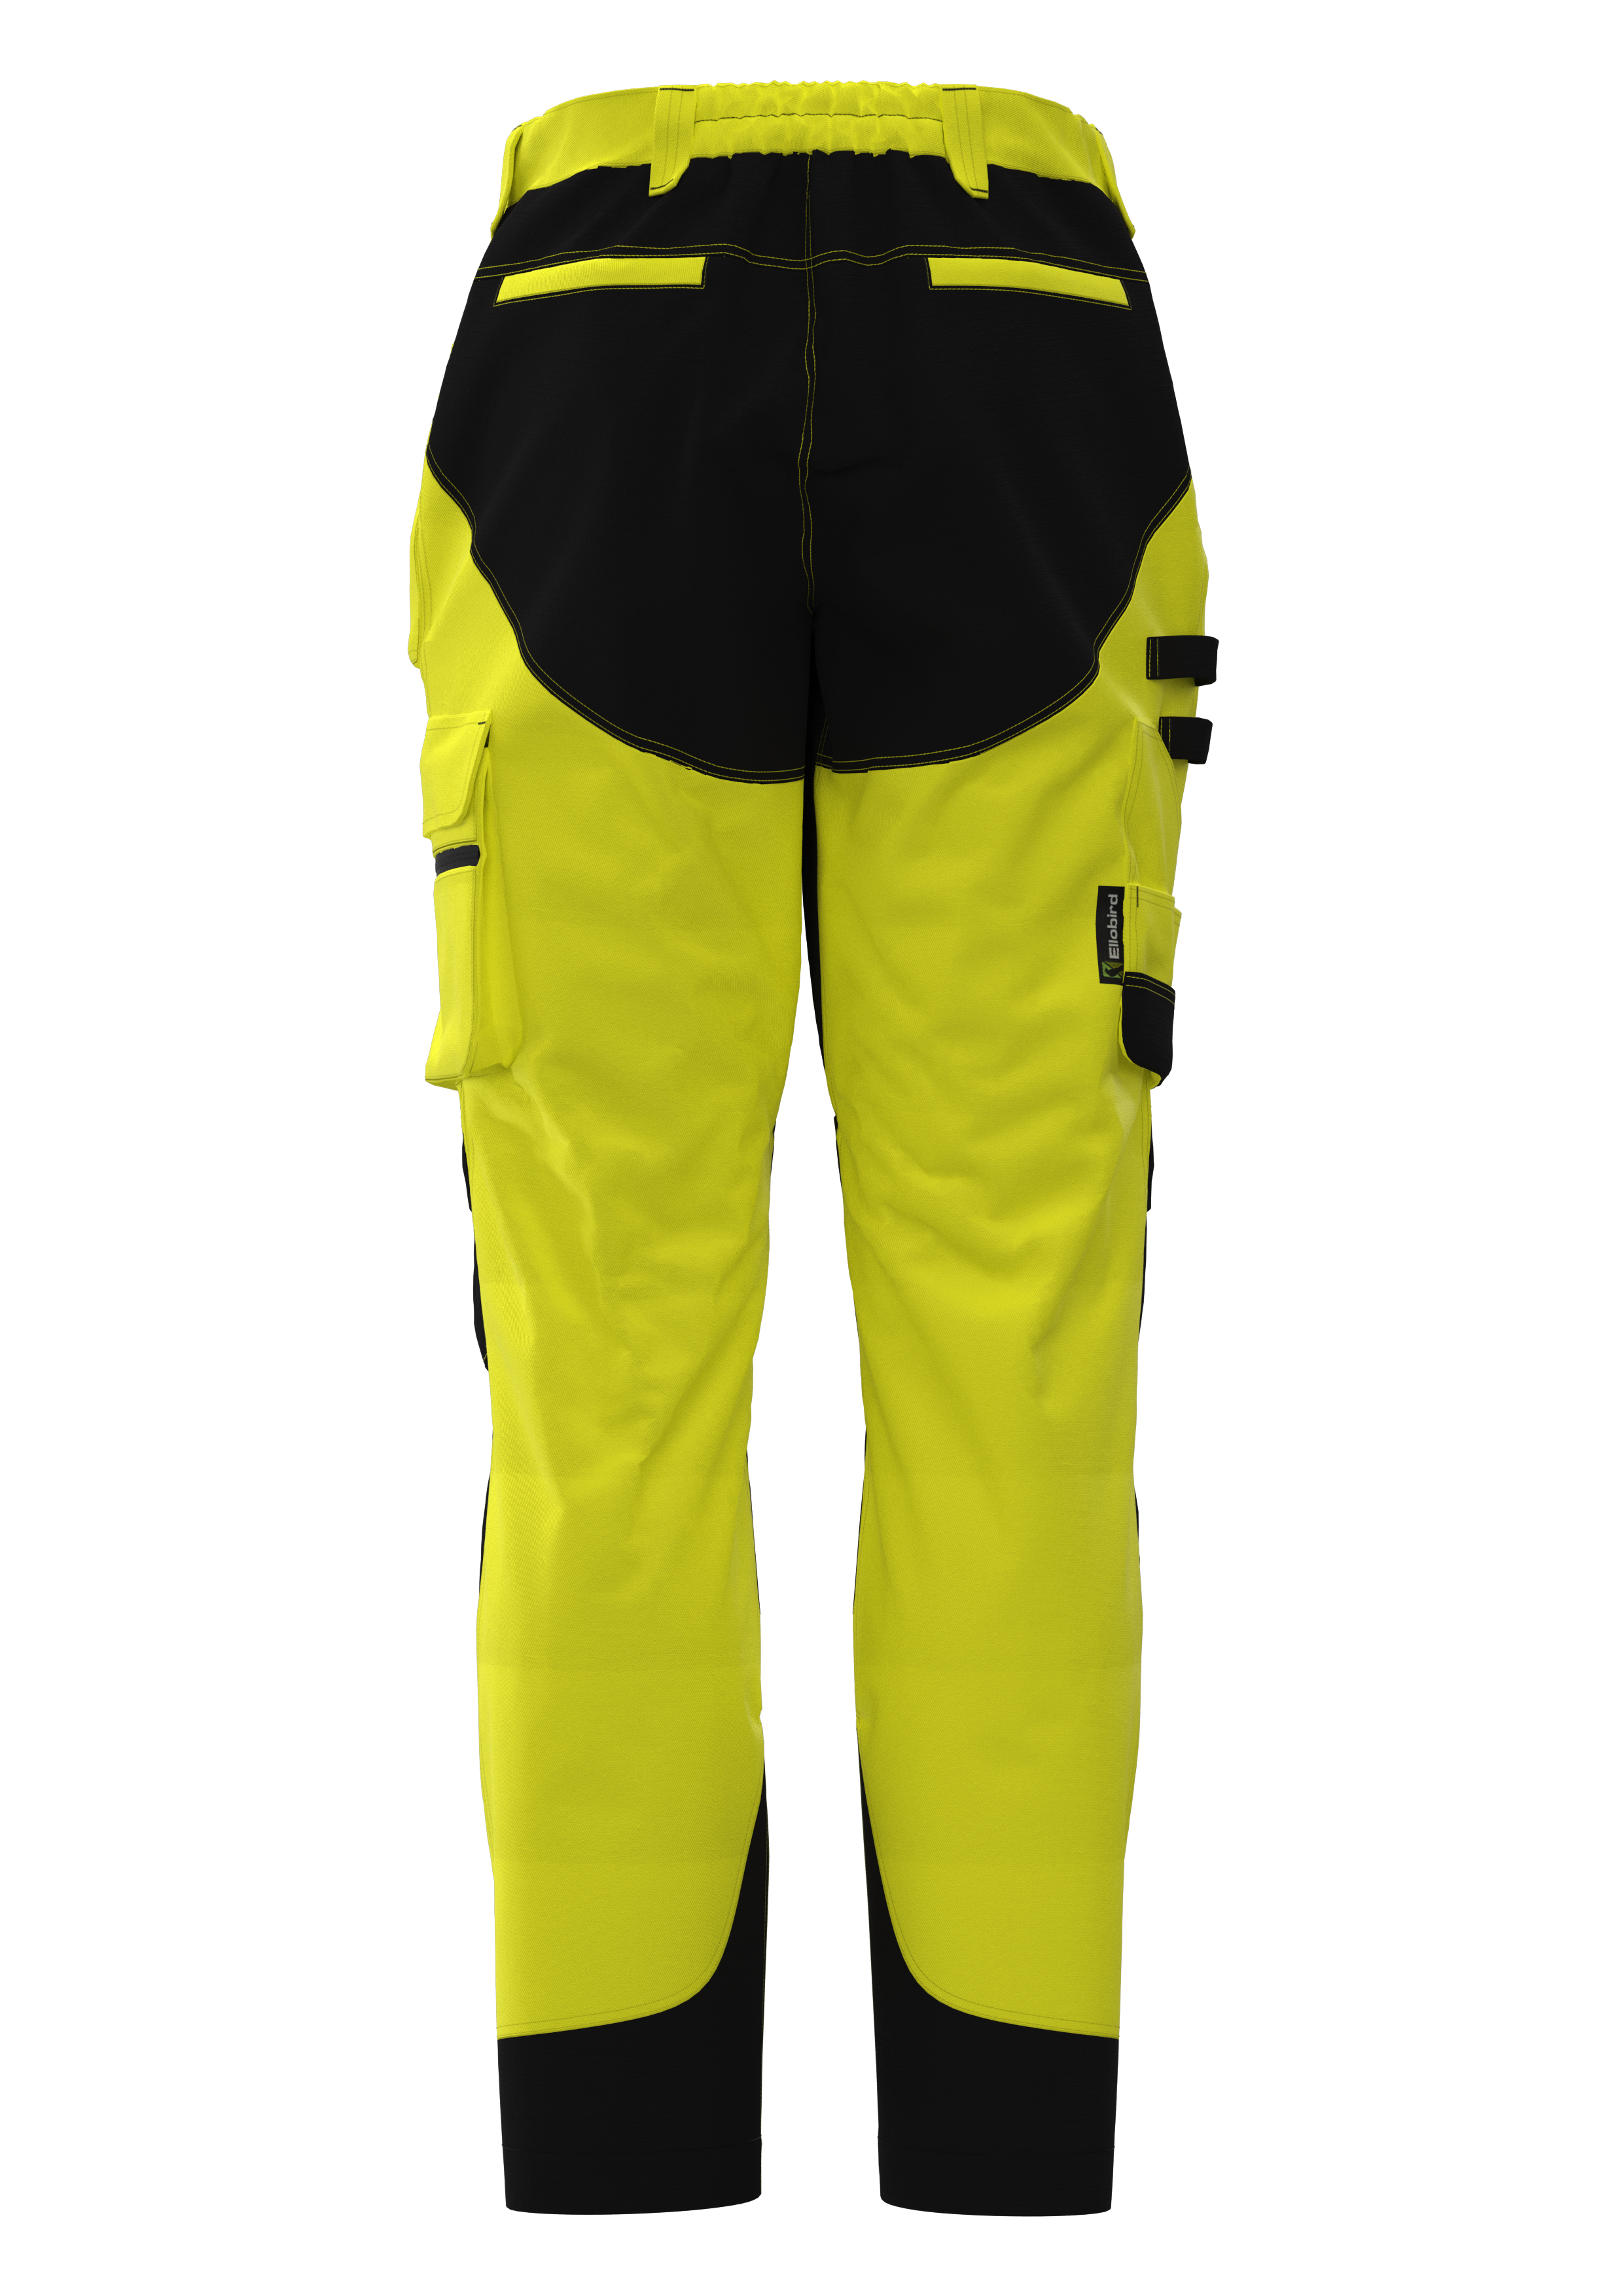 6630 High Vis Work Trousers Waterproof 37.5 Class 2 Yellow 6604 Snickers